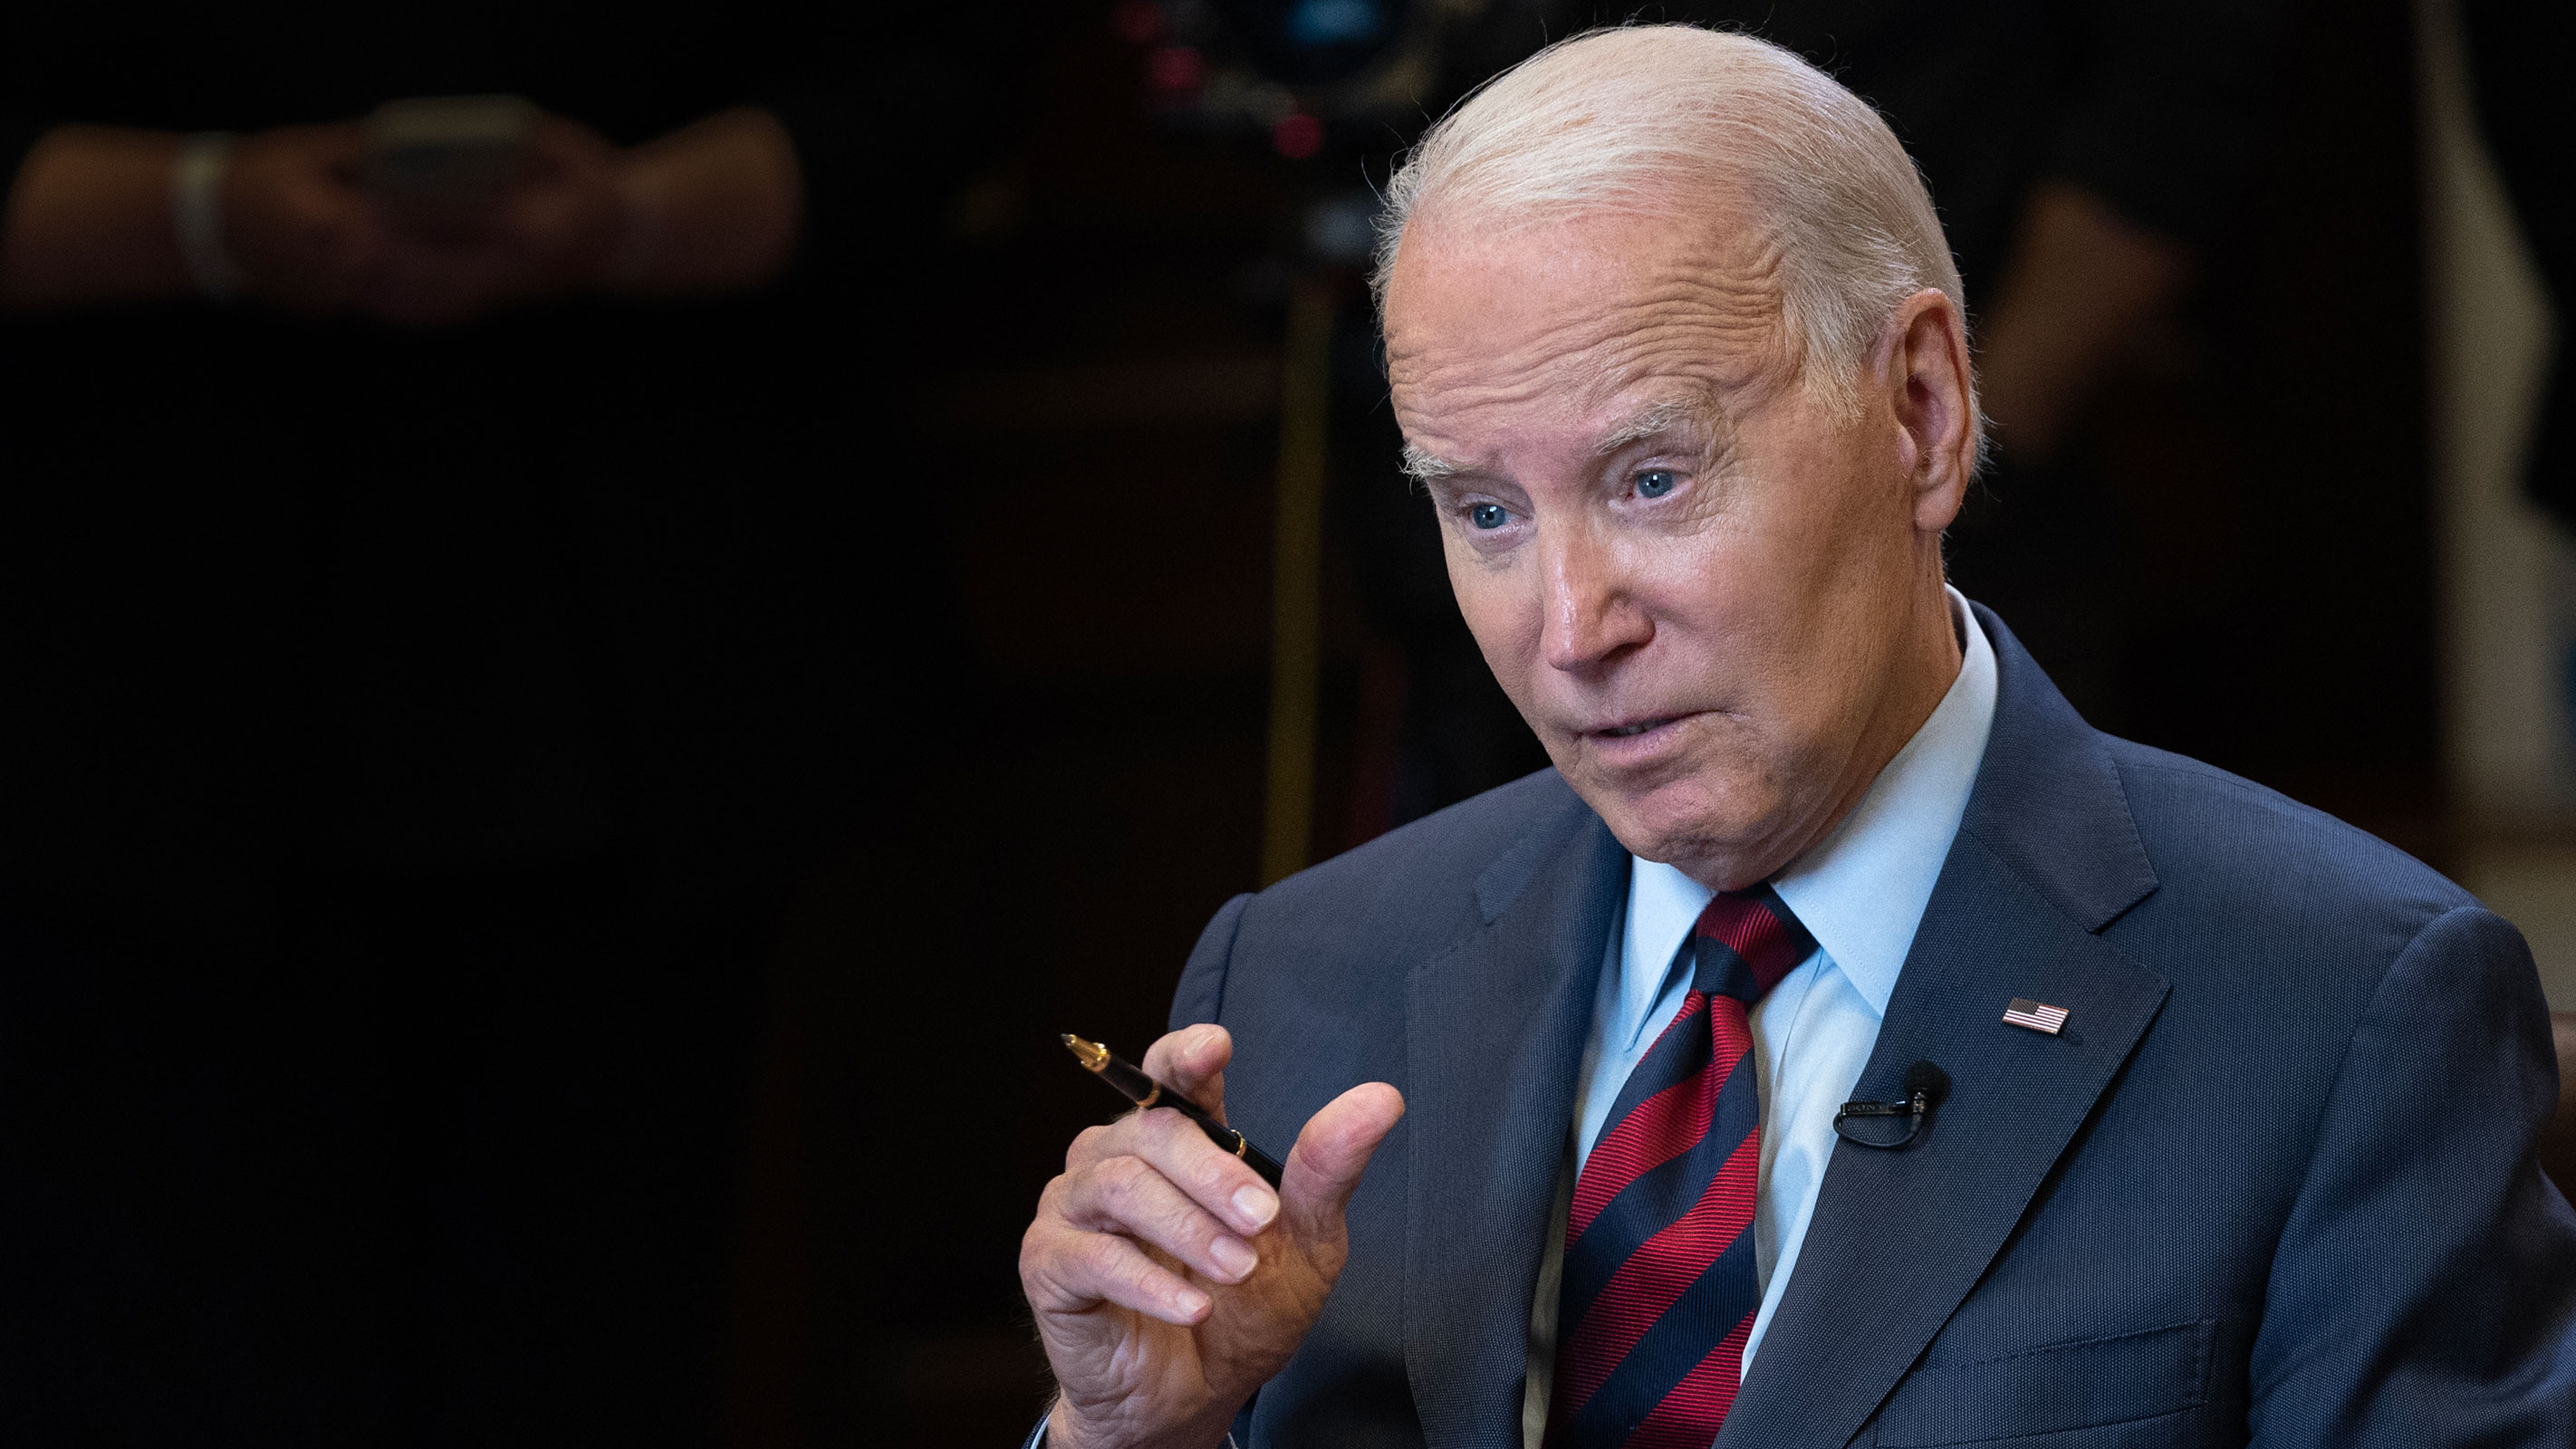 President Joe Biden speaks with CNN's Fareed Zakaria during a televised interview inside the Roosevelt Room at the White House in Washington, on Friday, July 7, 2023.